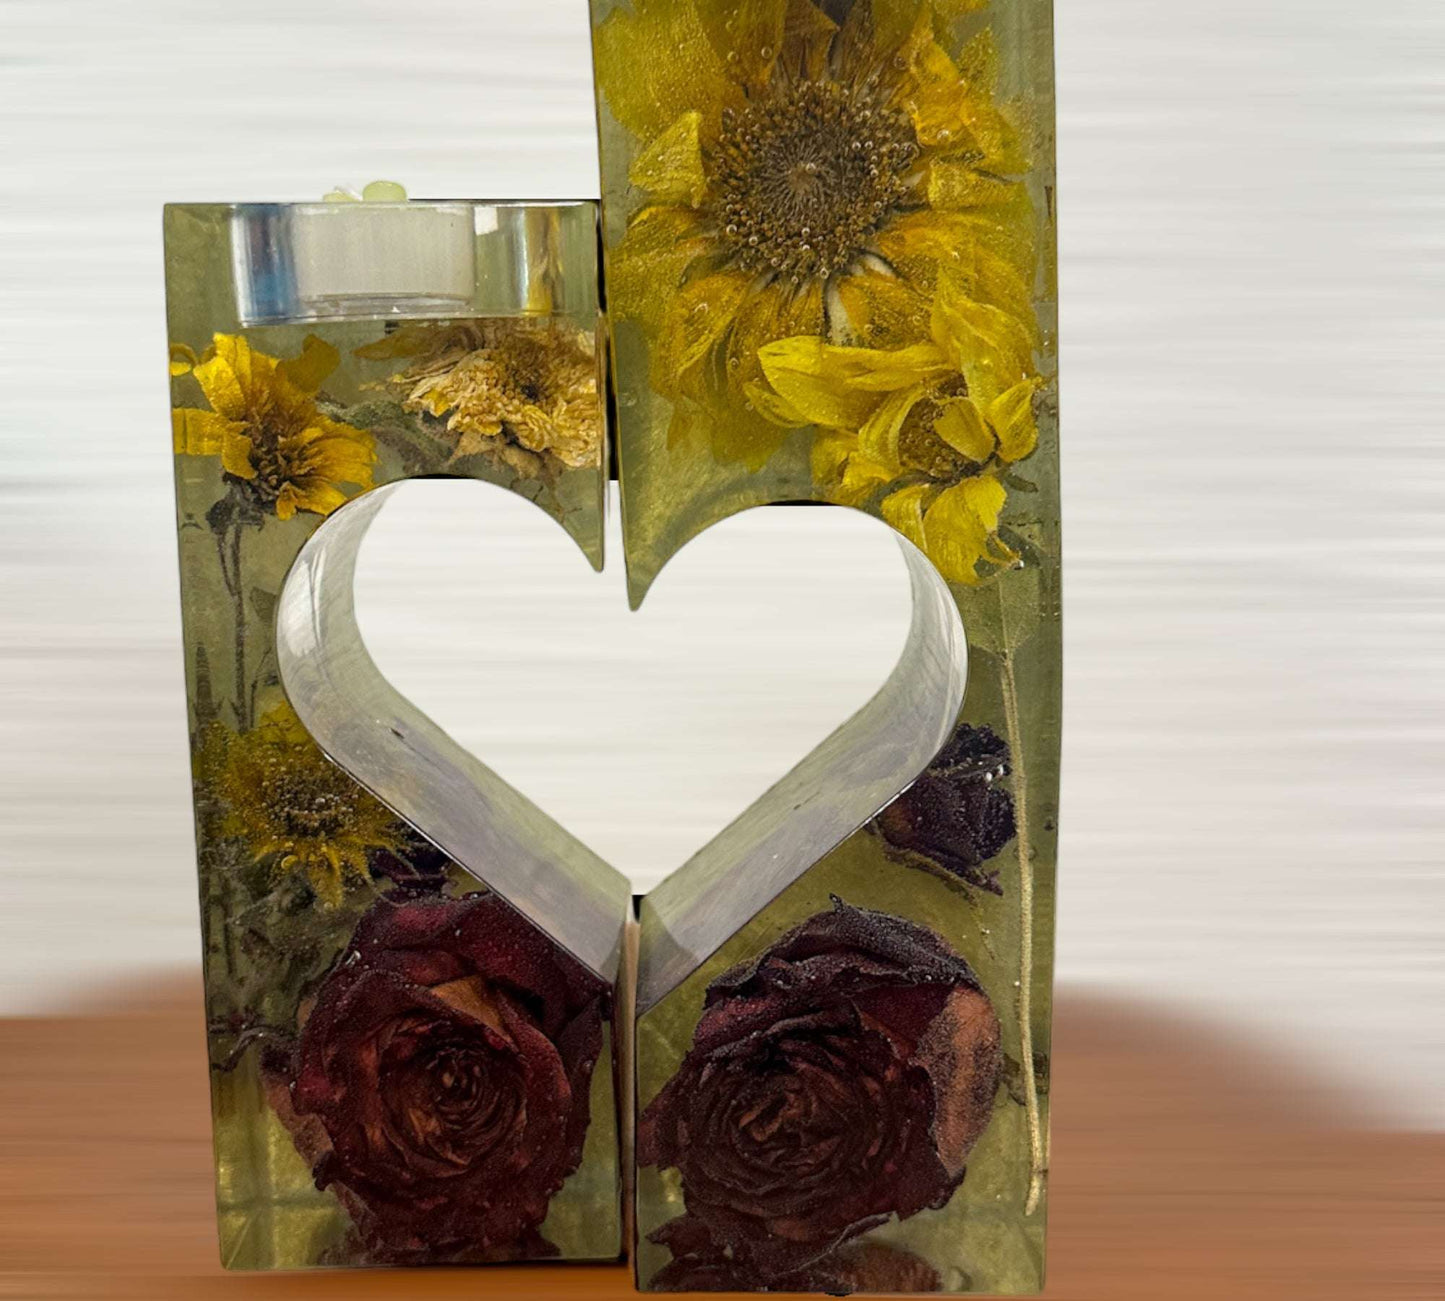 Sunflower and Rose Tealight Centrepiece: Home Decor with Sunflowers